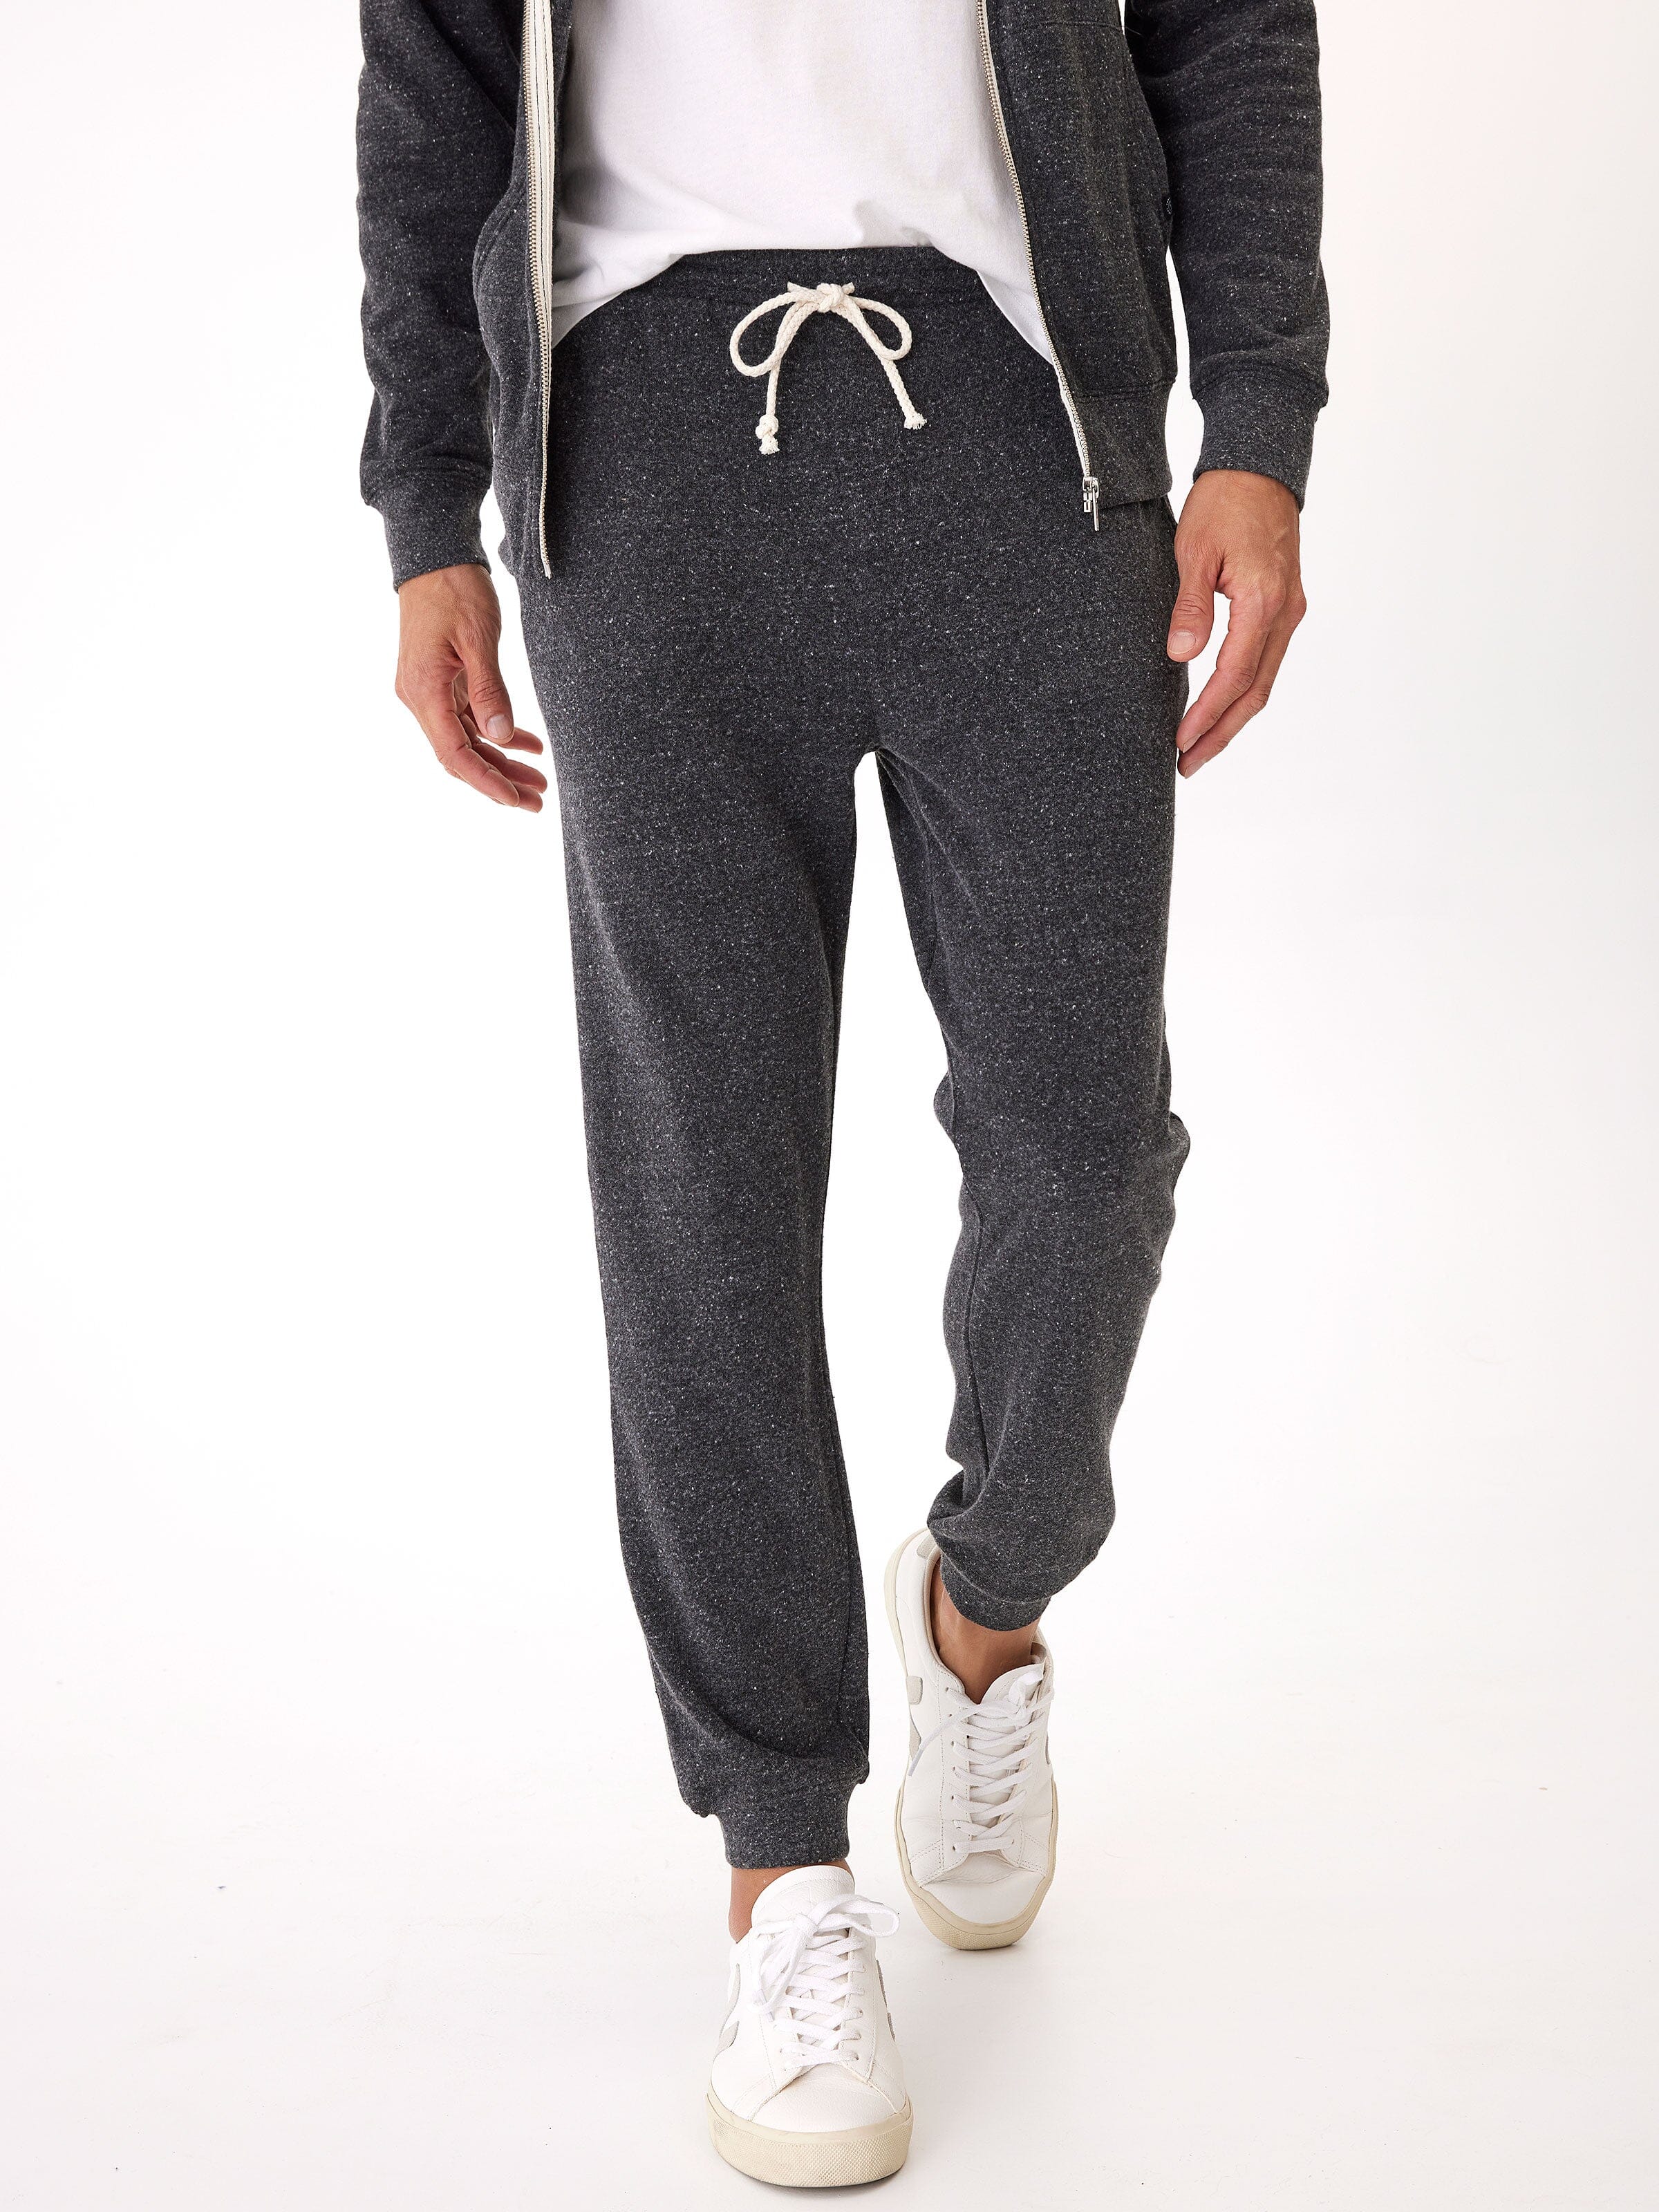 Triblend Fleece Jogger in Heather Black – Threads 4 Thought